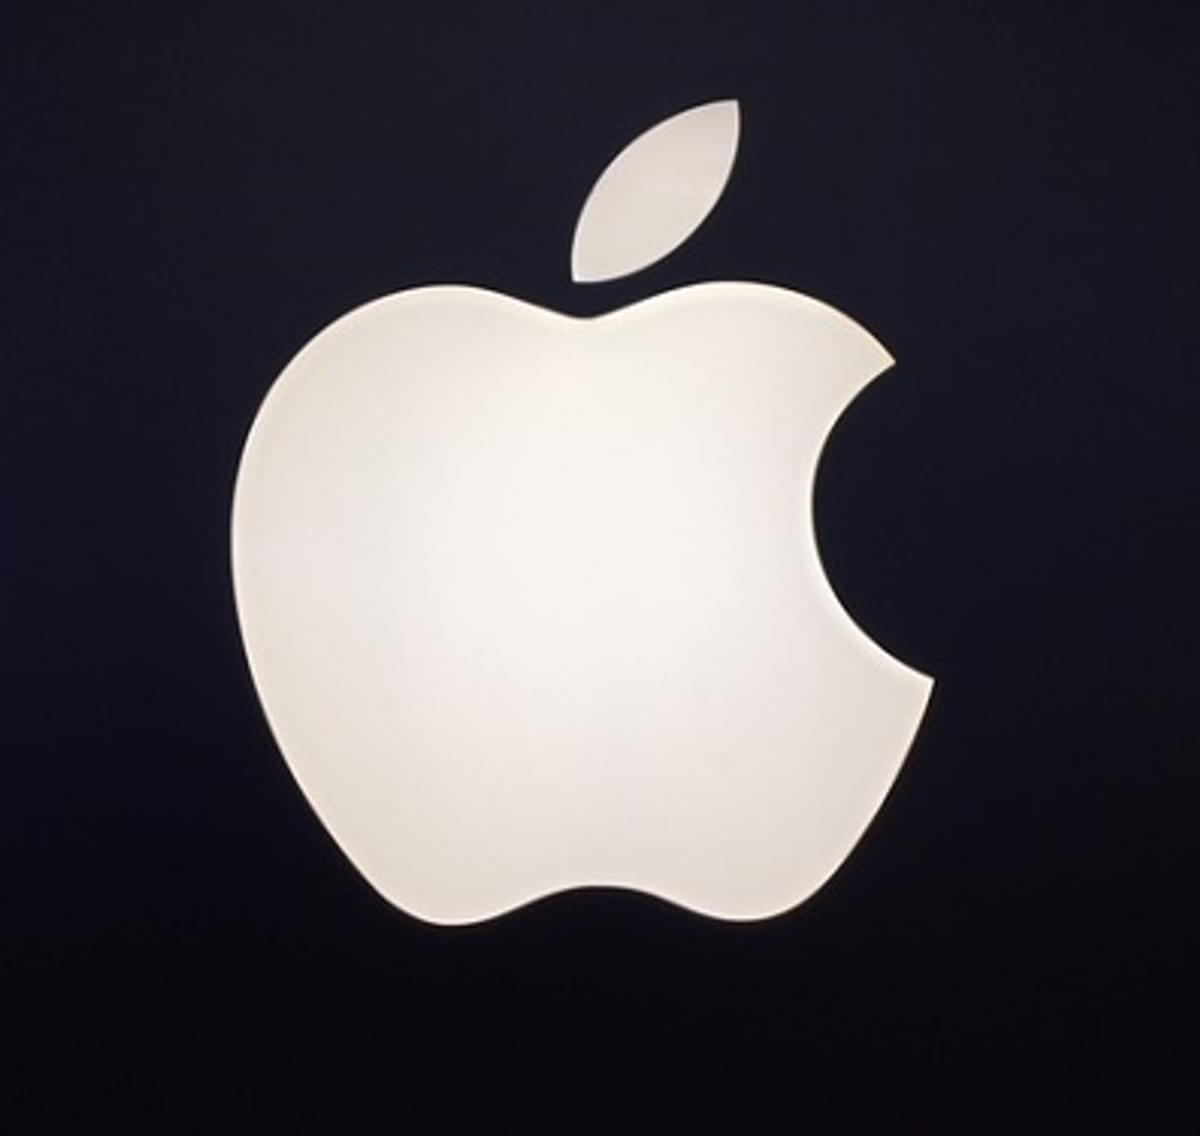 Apple Worldwide Developers Conference image